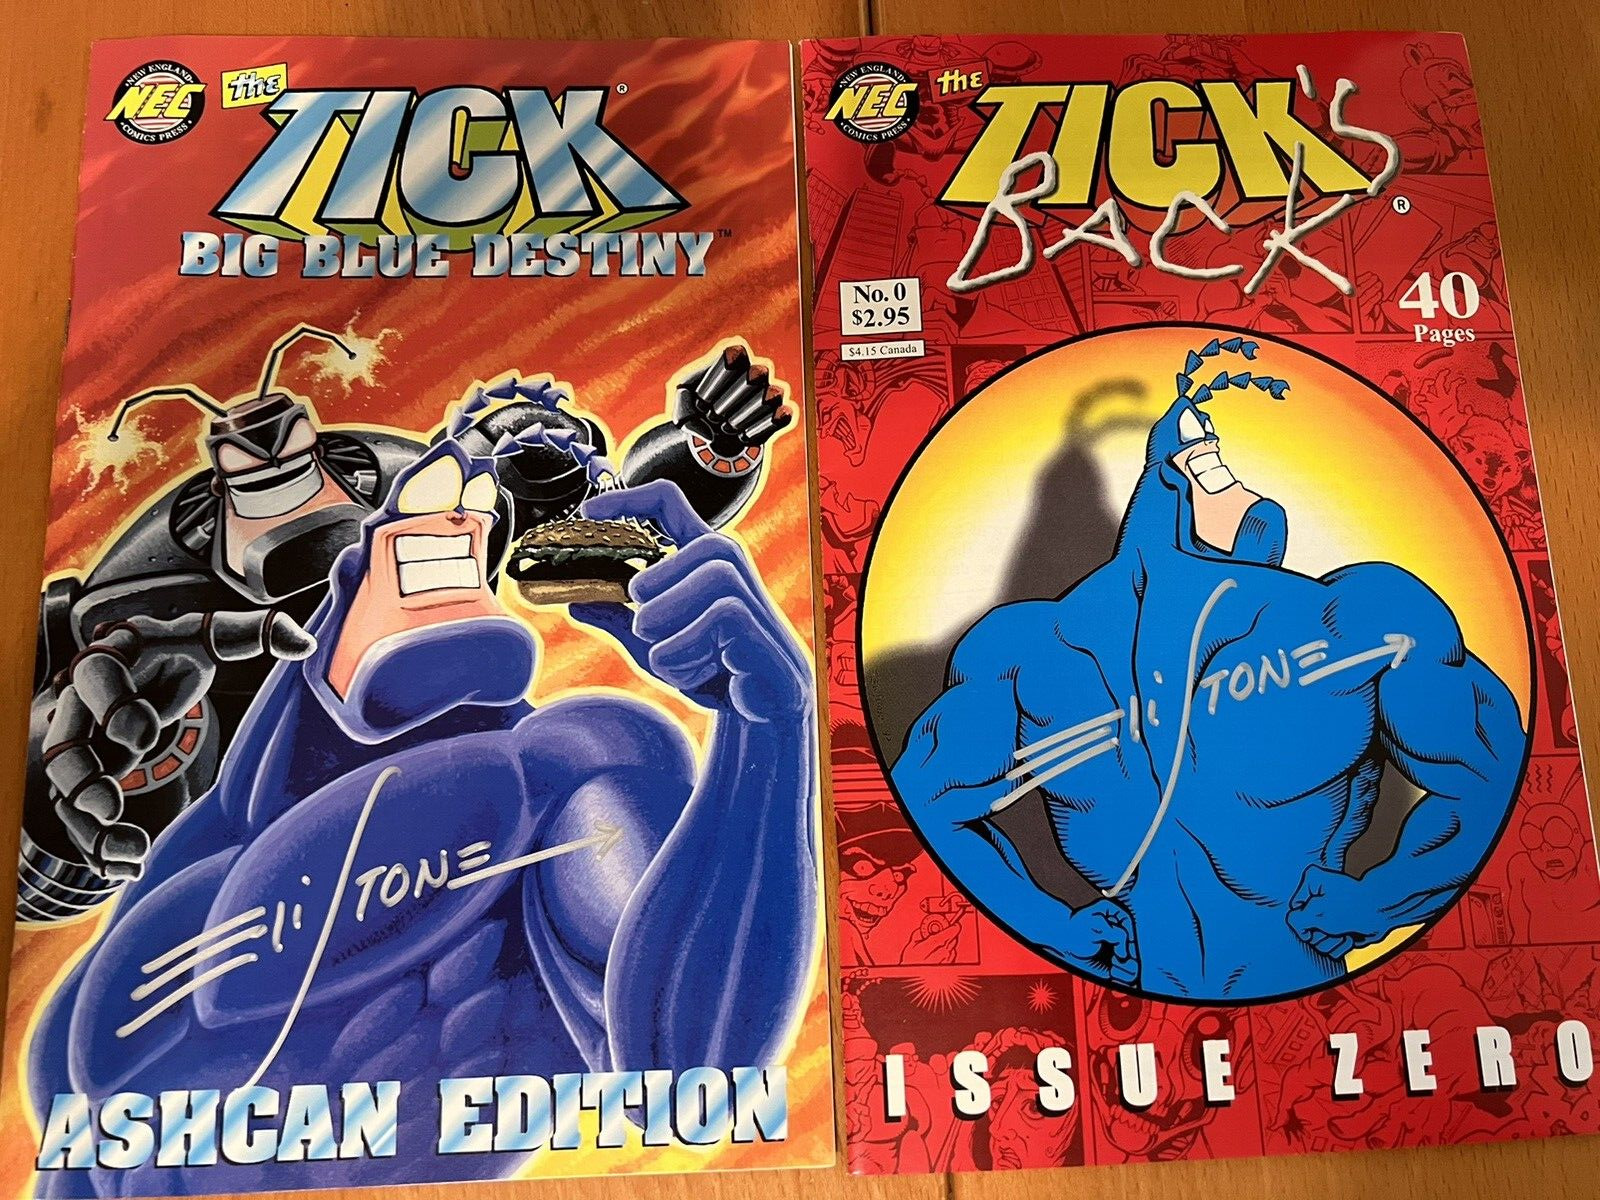 The TICK\'S BACK  #0  Red Cover Version SIGNED Eli Stone